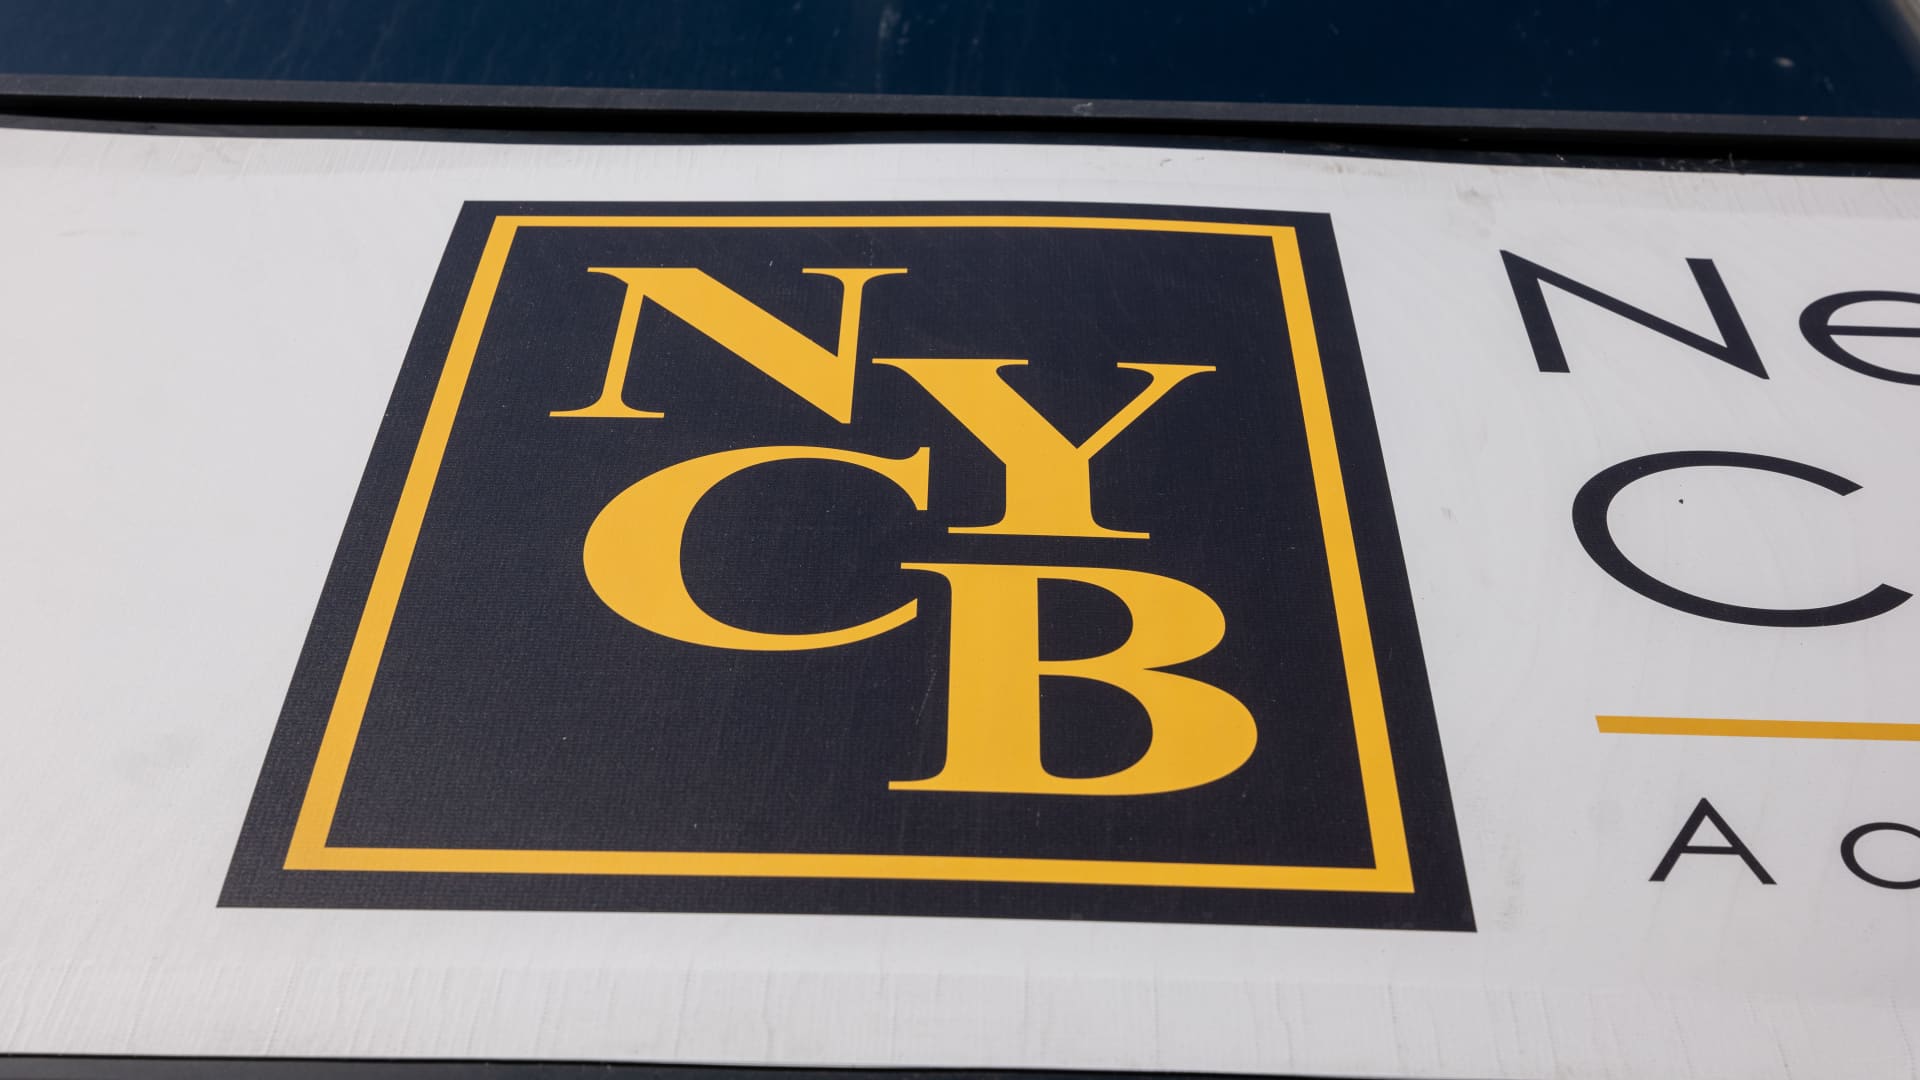 NYCB shares jump 30% after CEO gives two-year plan for 'clear path to profitability'